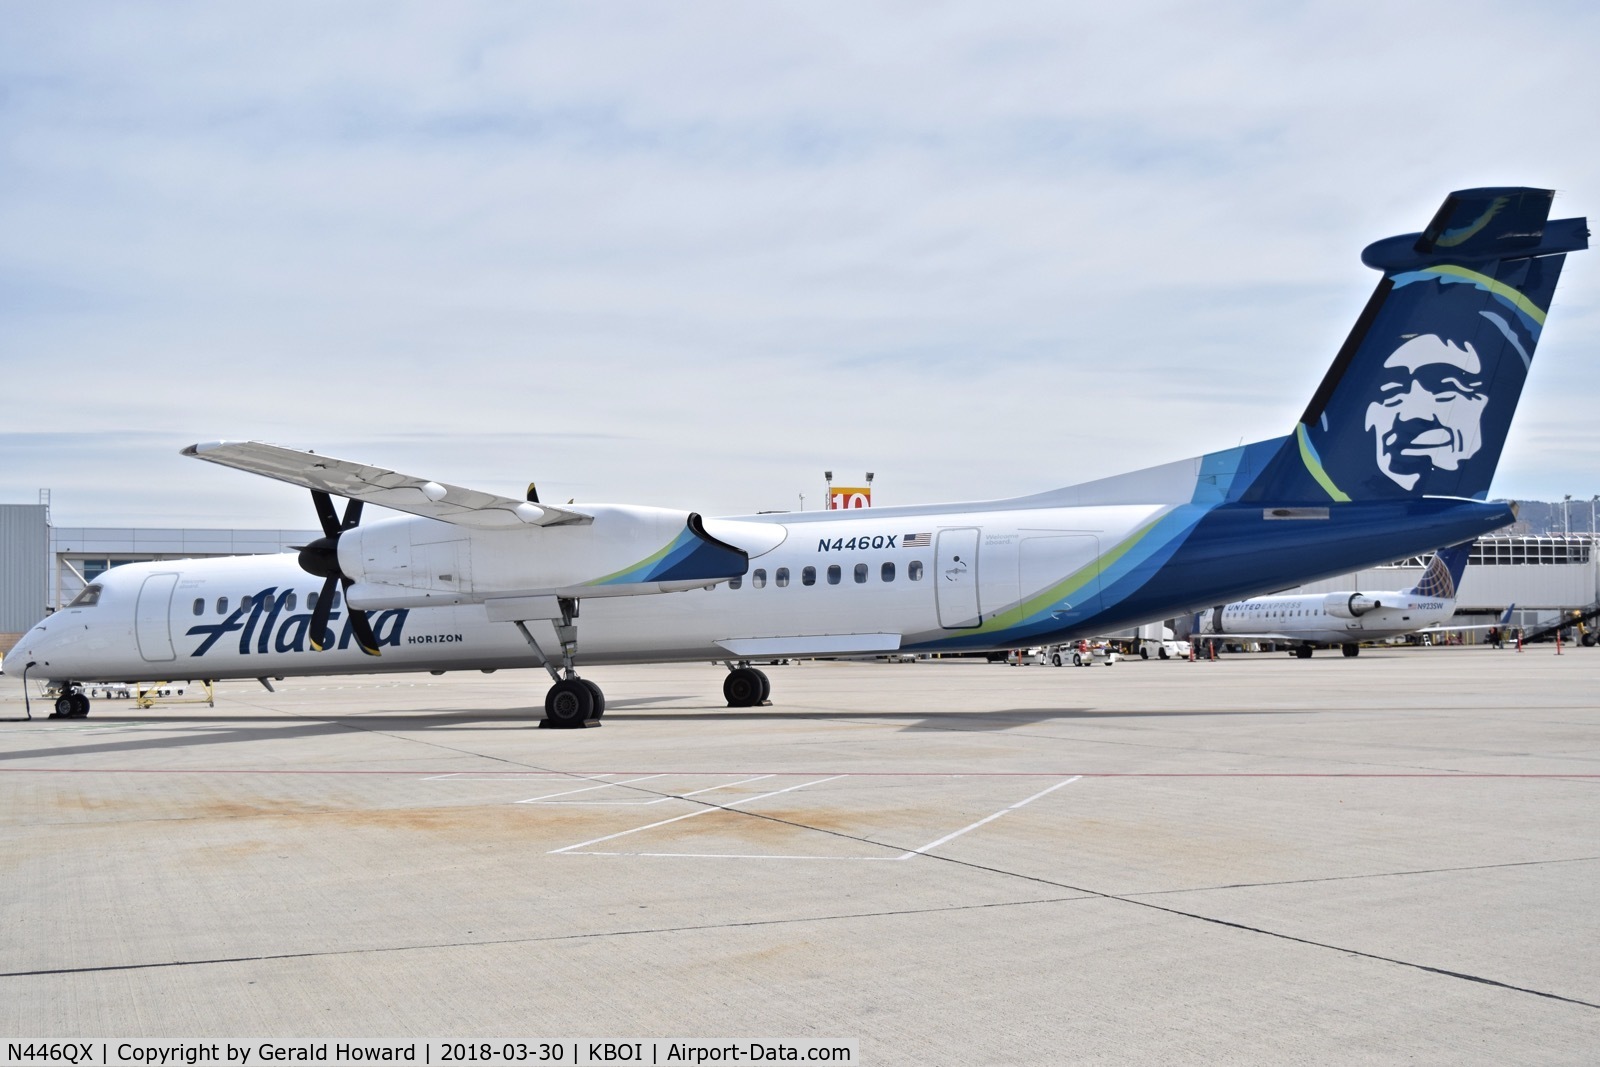 N446QX, 2011 Bombardier DHC-8-402 Dash 8 C/N 4363, Parked at the Gate.